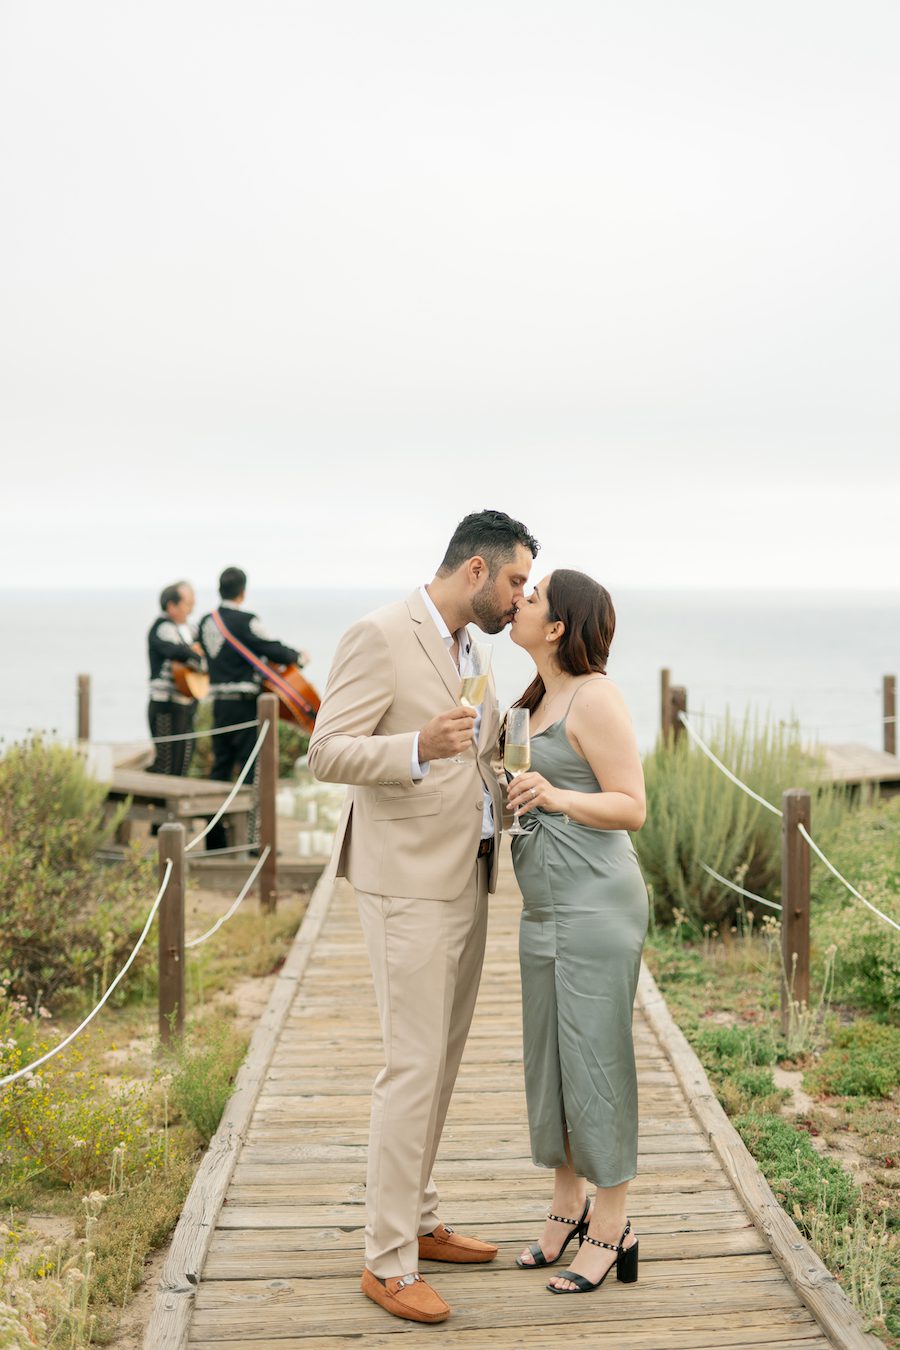 A Stunning Ocean View Picnic Proposal in OC California